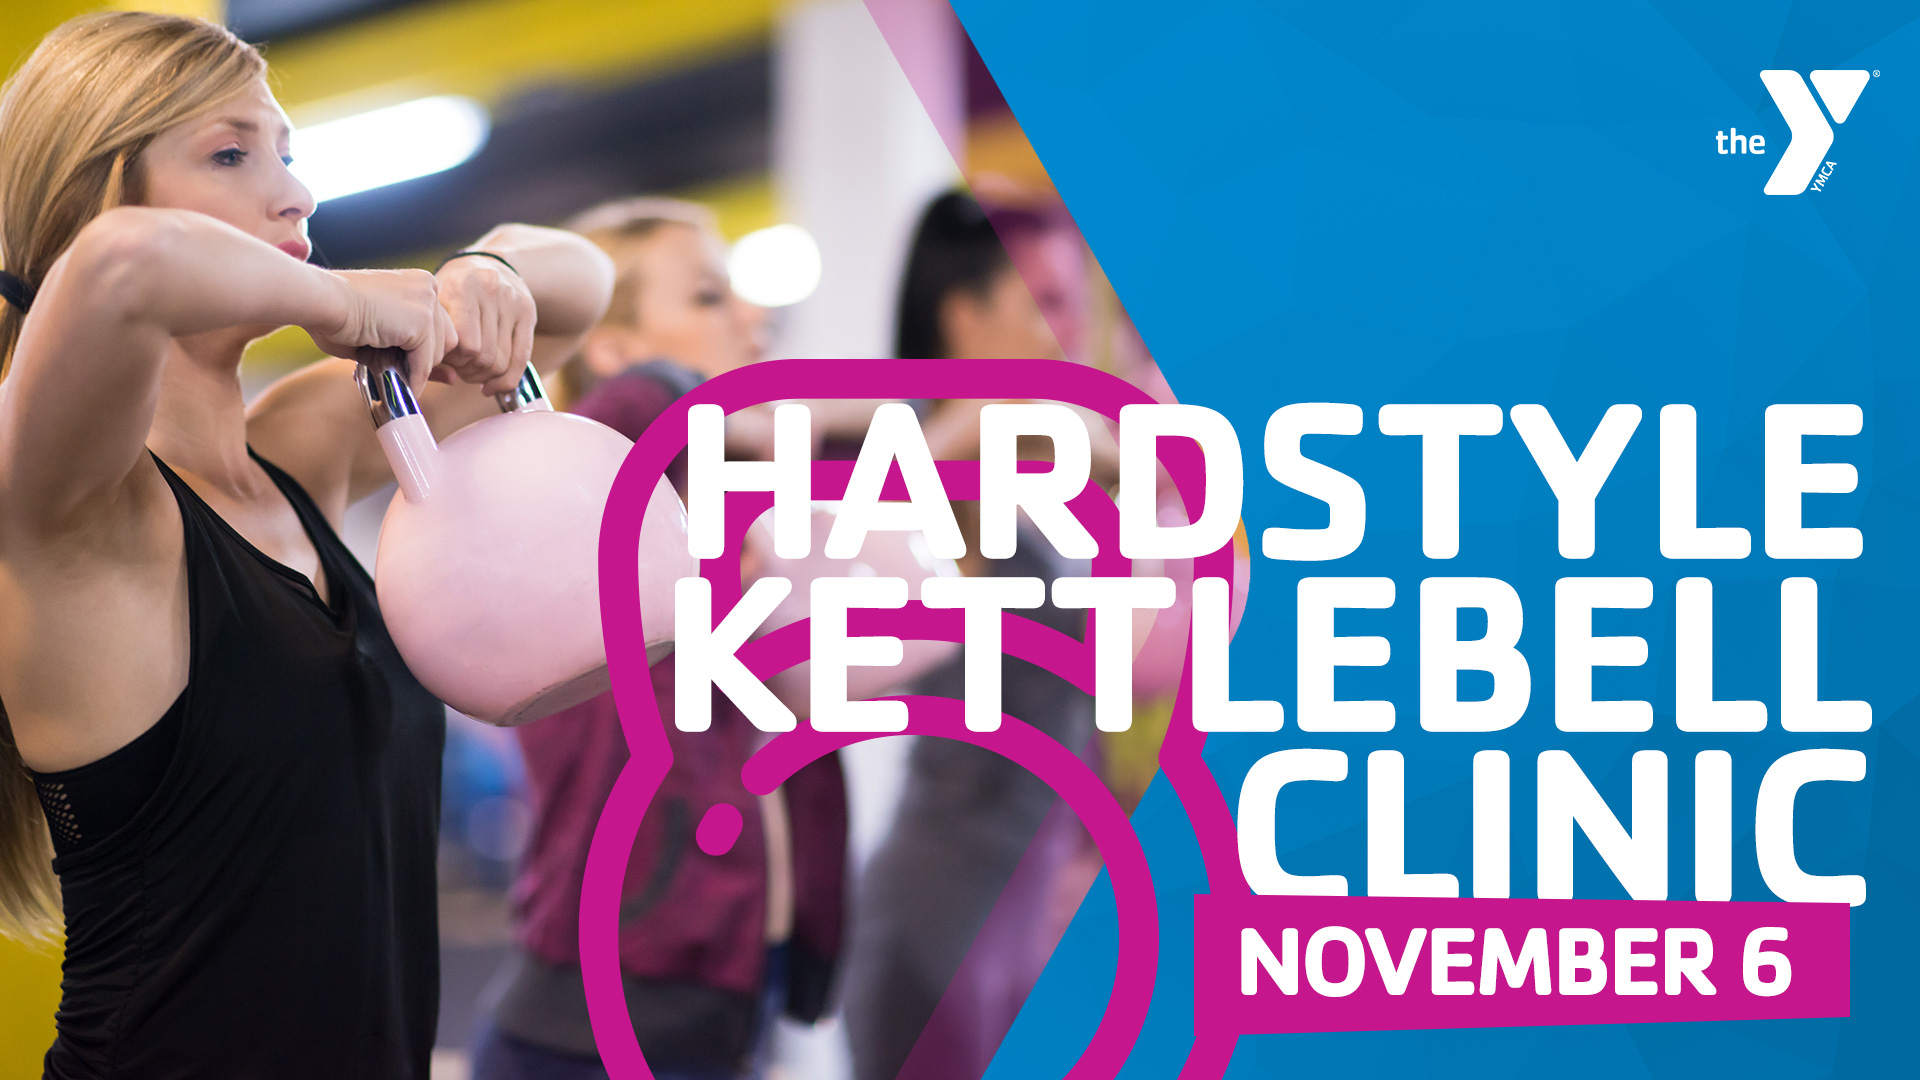 Featured image for “Hardstyle Kettlebell Clinic”